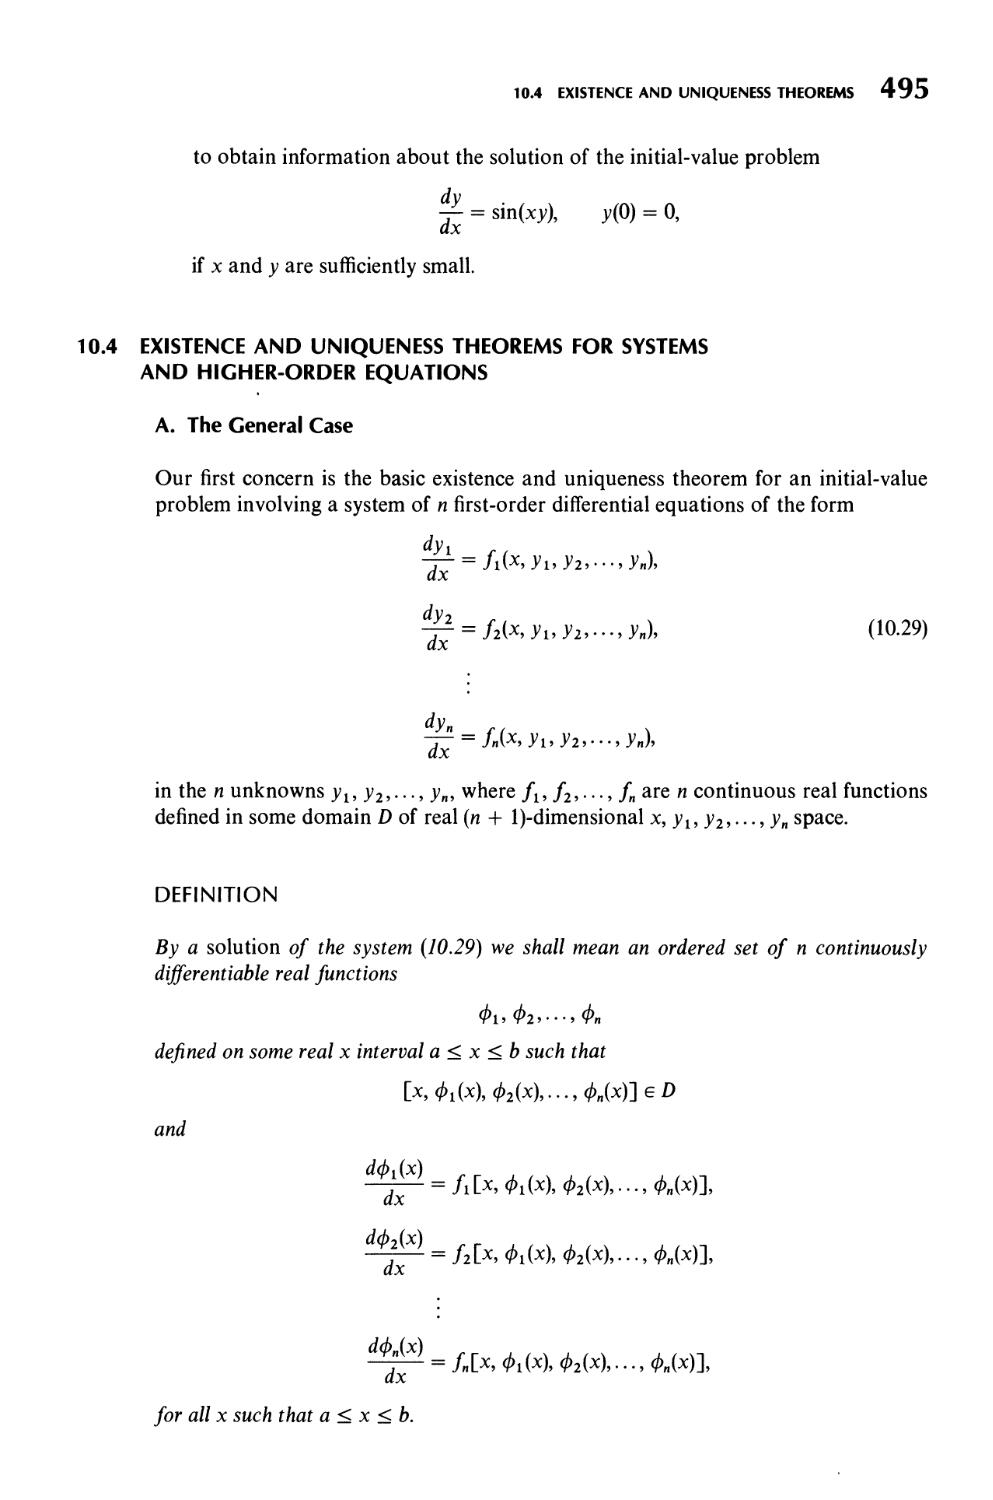 10.4  Existence and Uniqueness Theorems for Systems and Higher-Order Equations